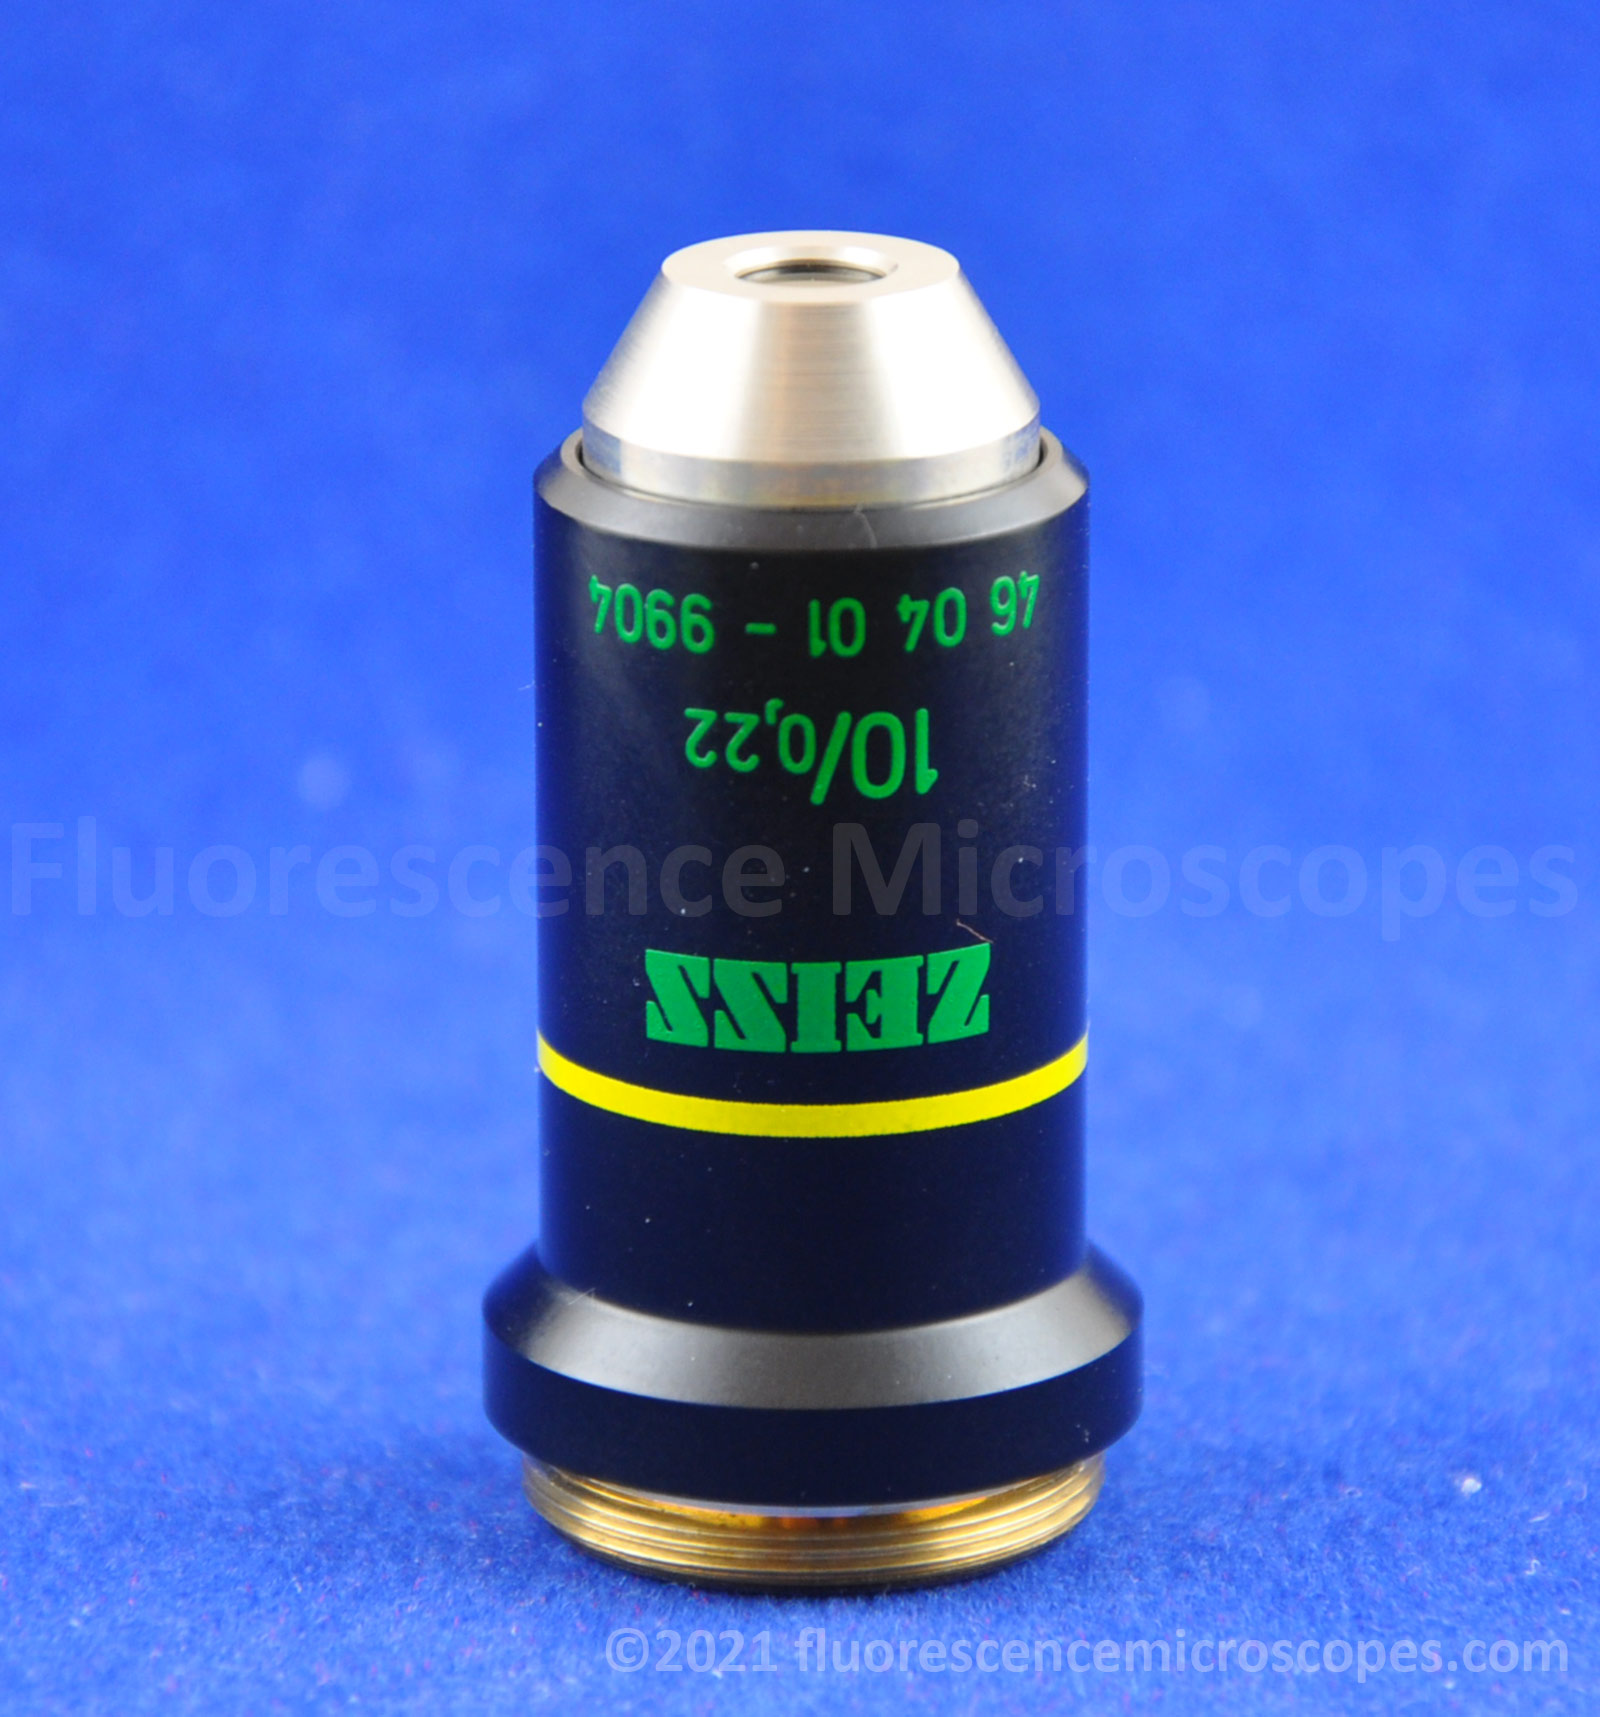 Zeiss 10x / 0.22, 160/-. Ph1 Phase Microscope Objective